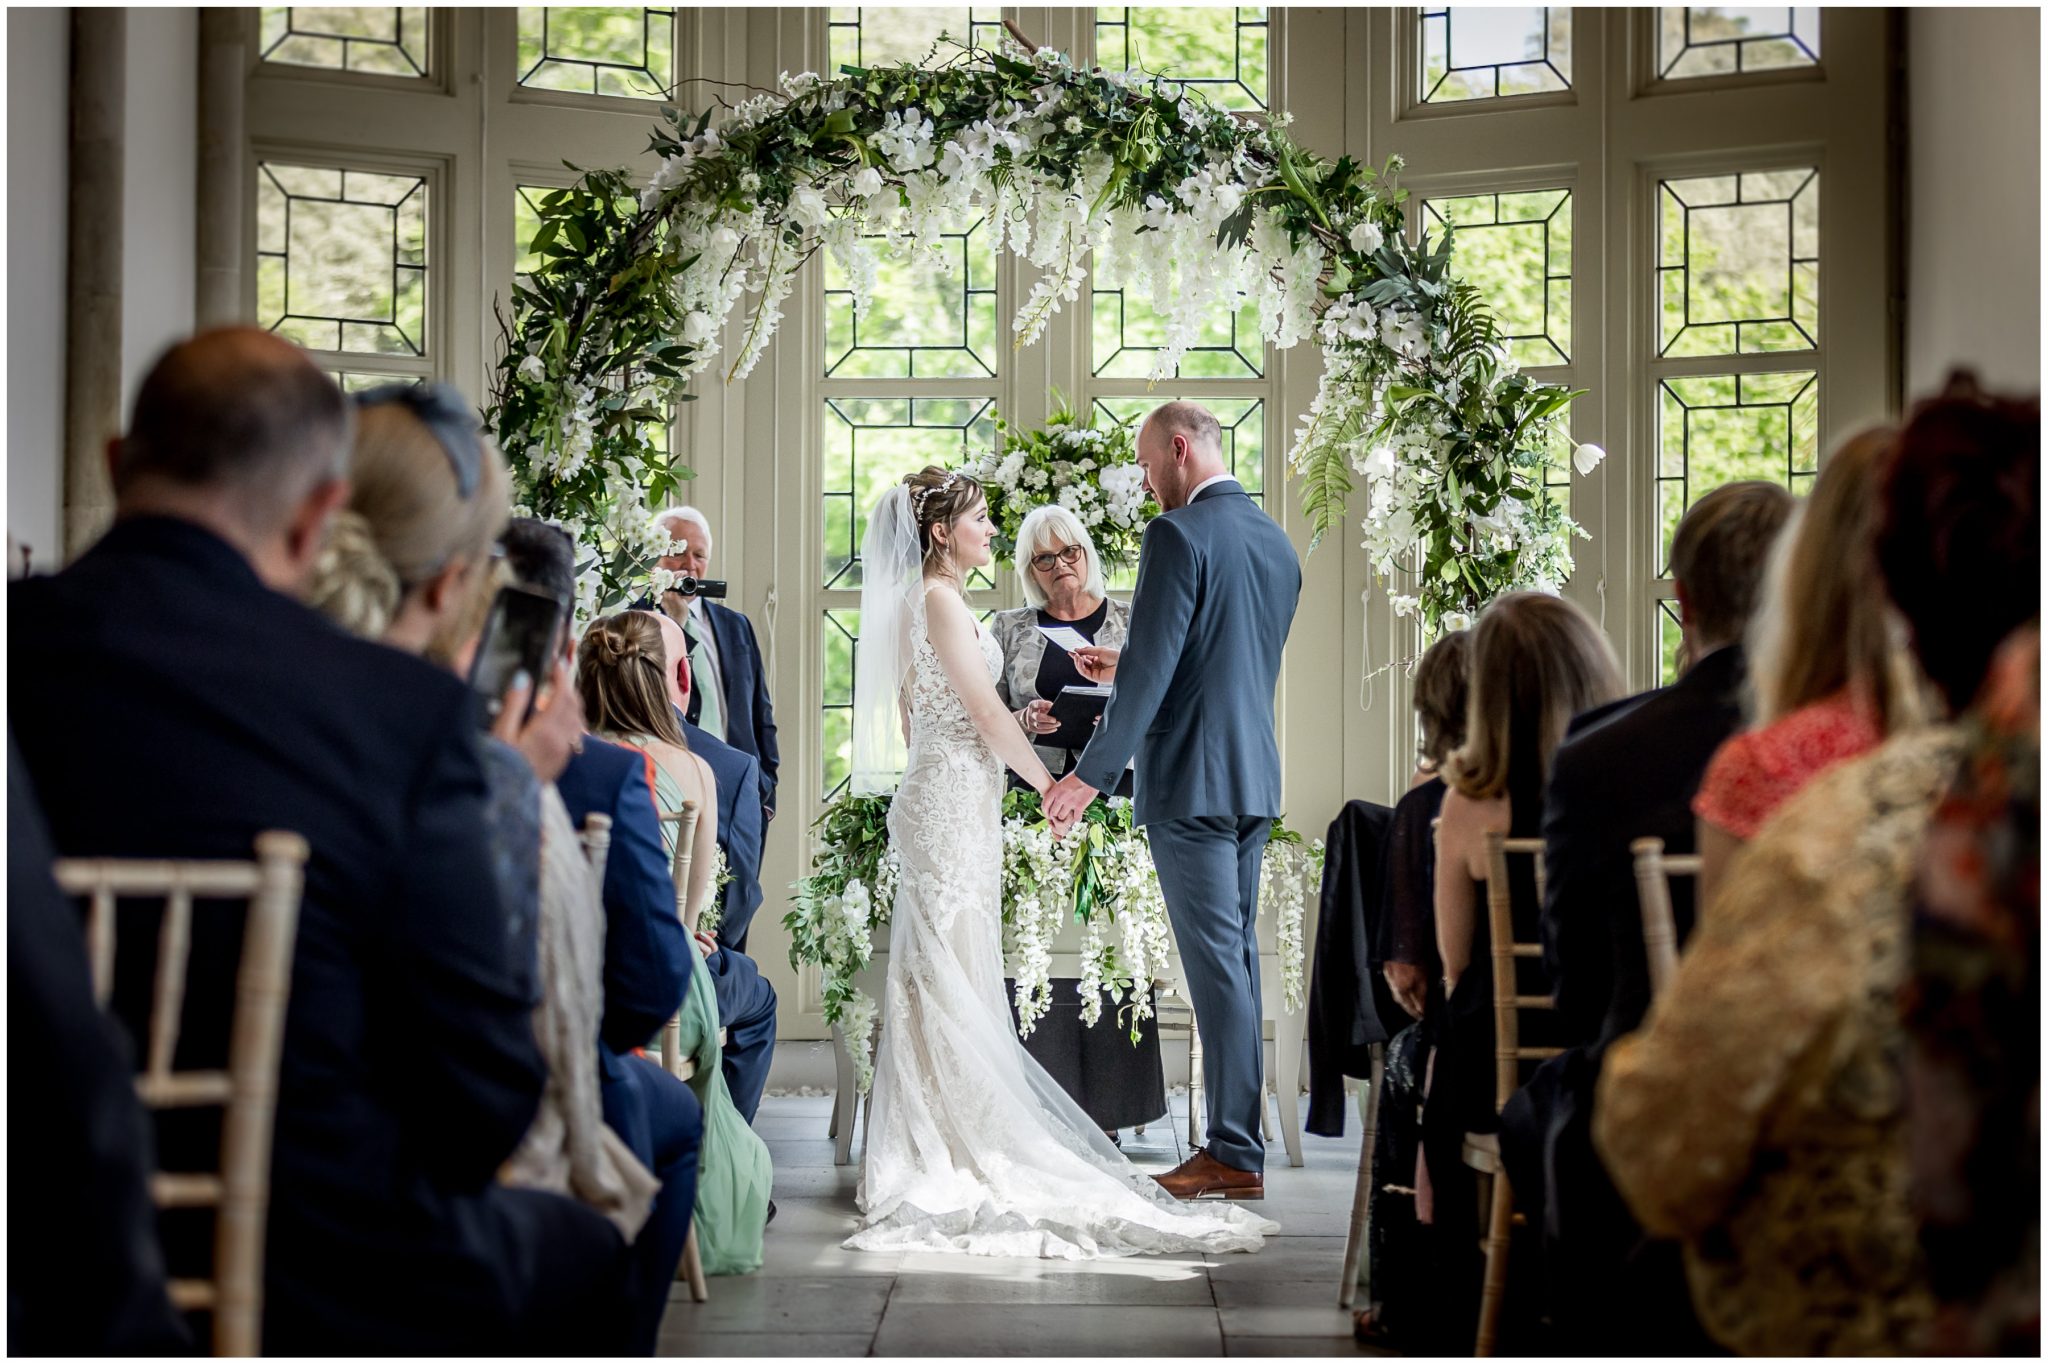 The couple framed by their floral arch as they make their vows